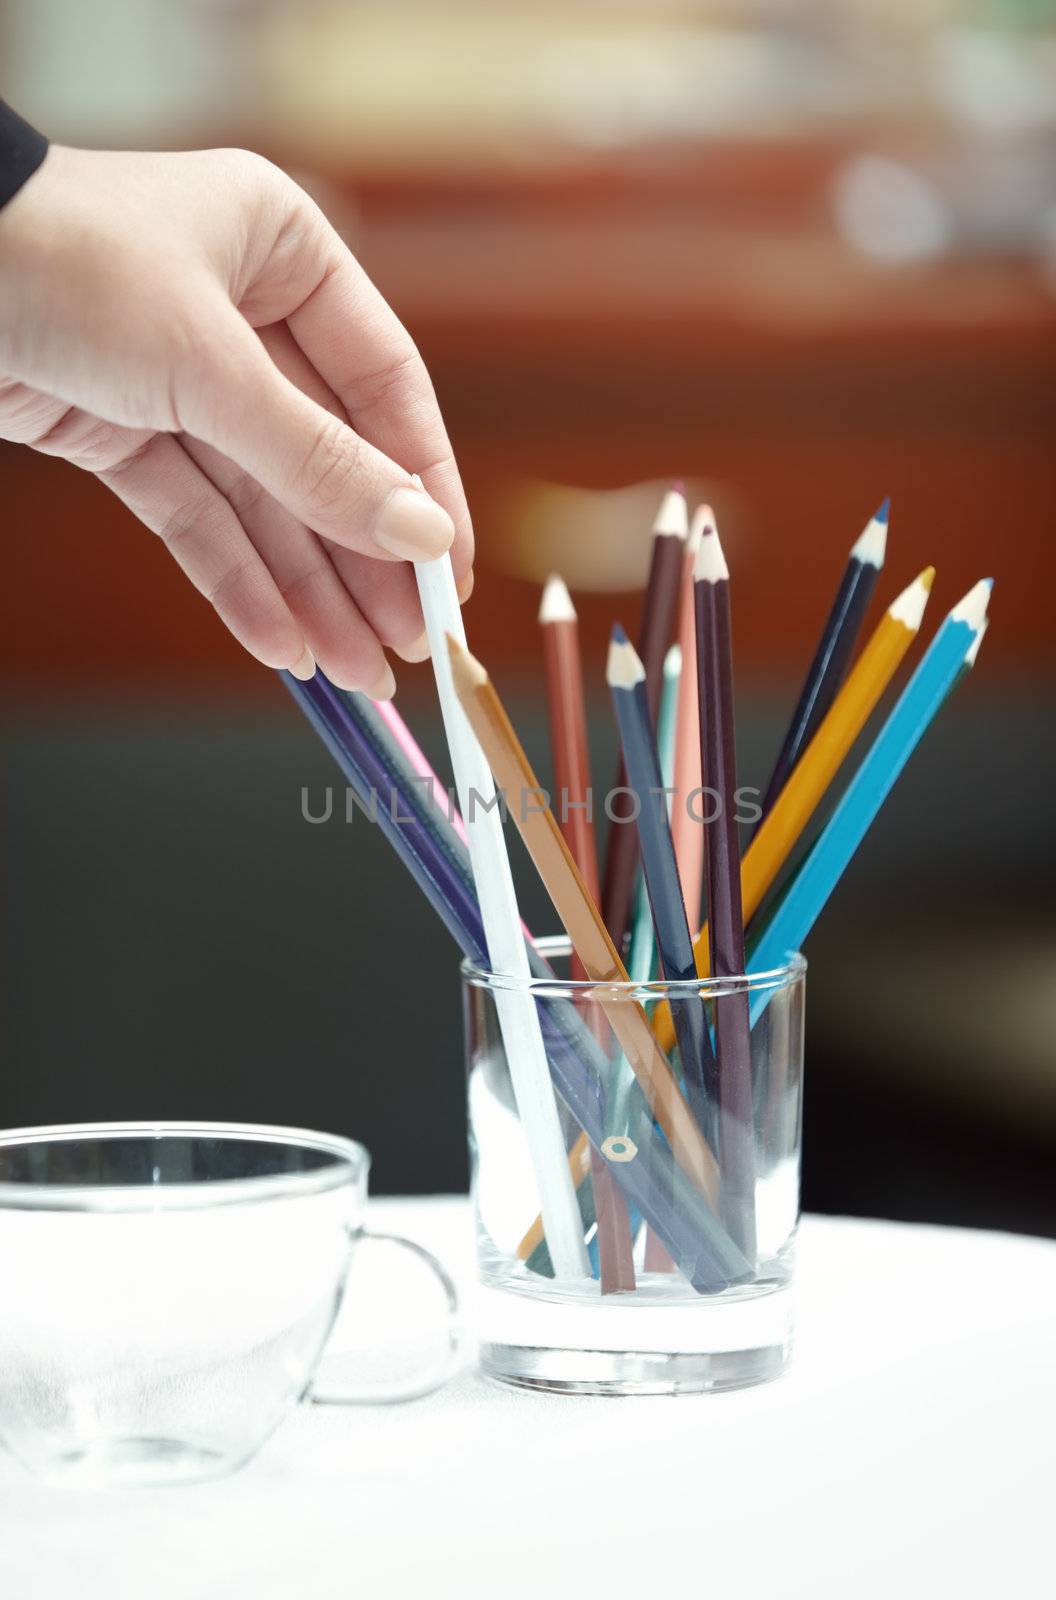 Human hand selecting colored pencil. Vertical photo